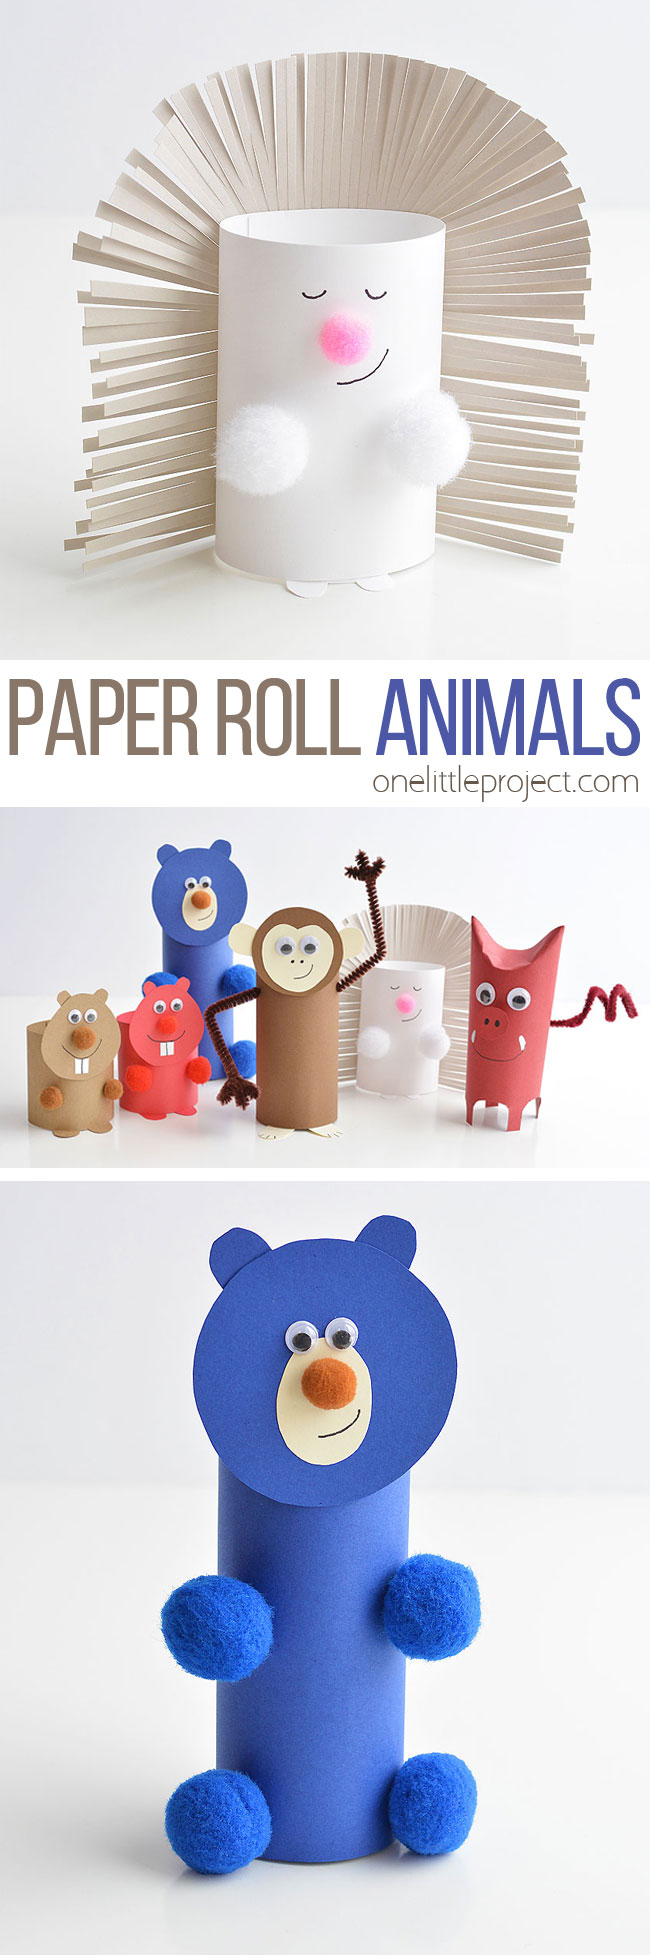 How to Make Paper Roll Animals | Bears, Monkeys, Porcupines and More!